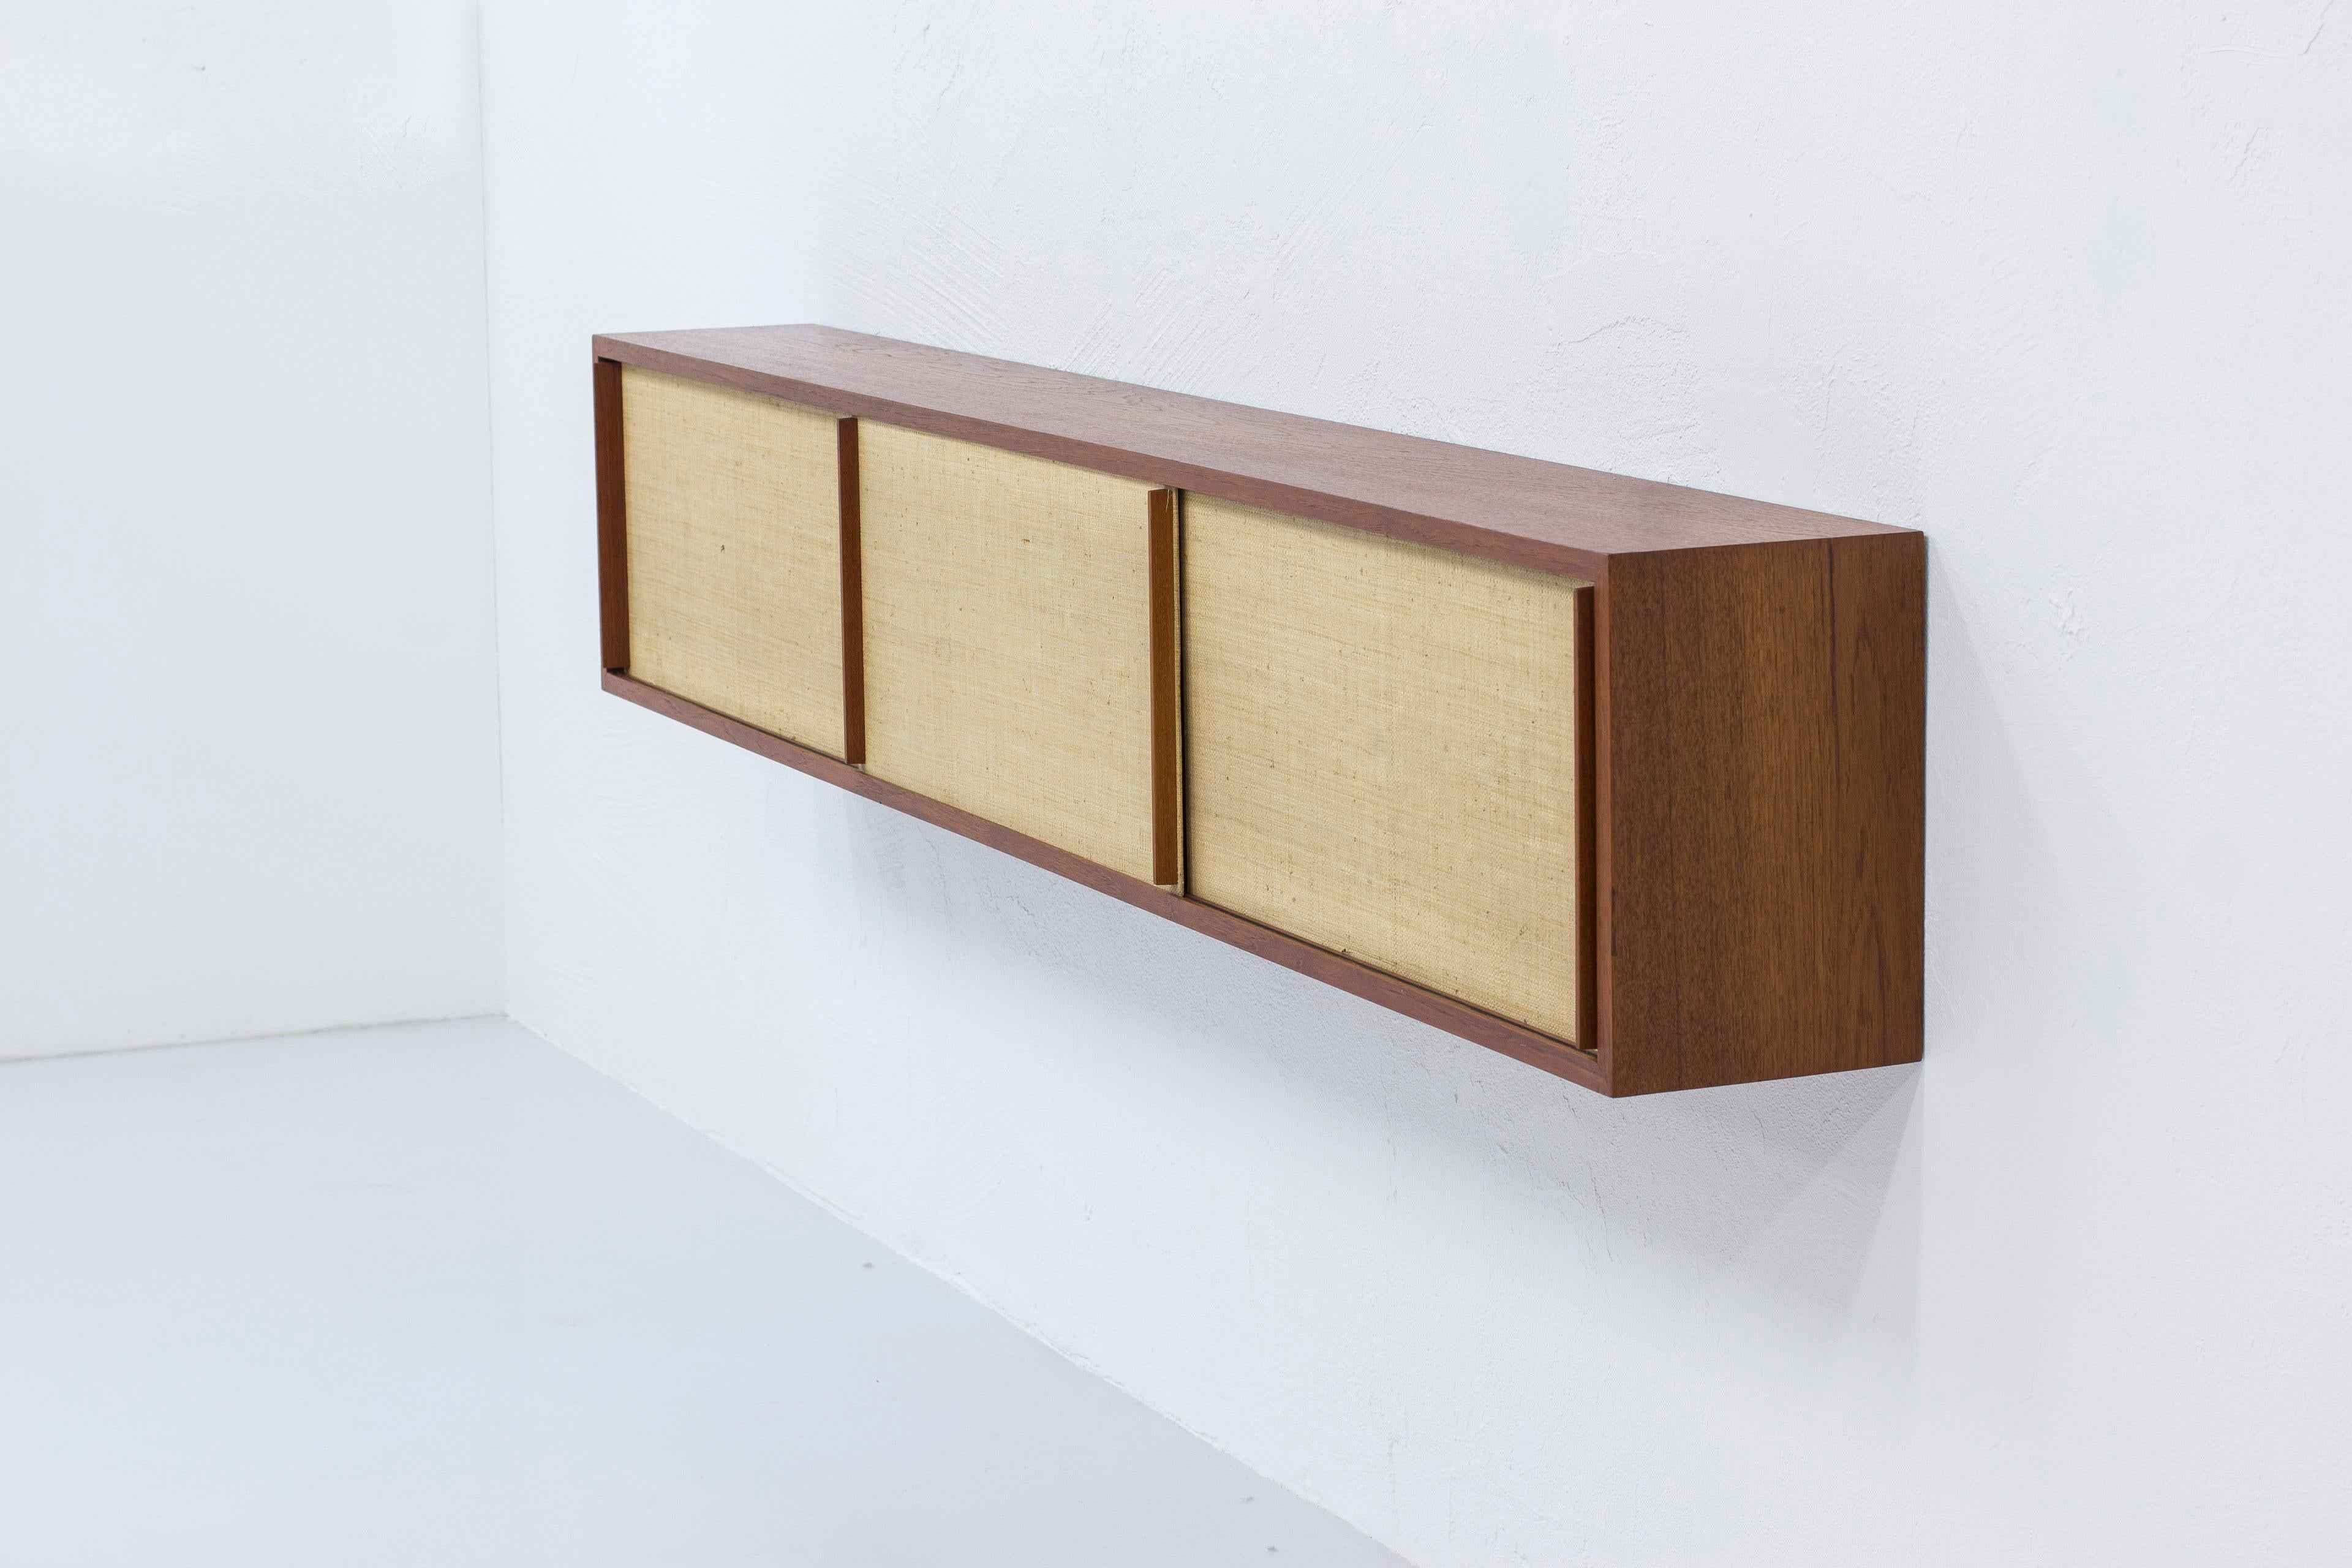 Wall hung sideboard in the style of Illmari Tapiovaara. Produced in Finland during the 1950s. Made from teak with seaweed weave on the doors. The seaweed is very similar in aesthetics as rattan or cane weaved doors as can be seen in pieces by Hans